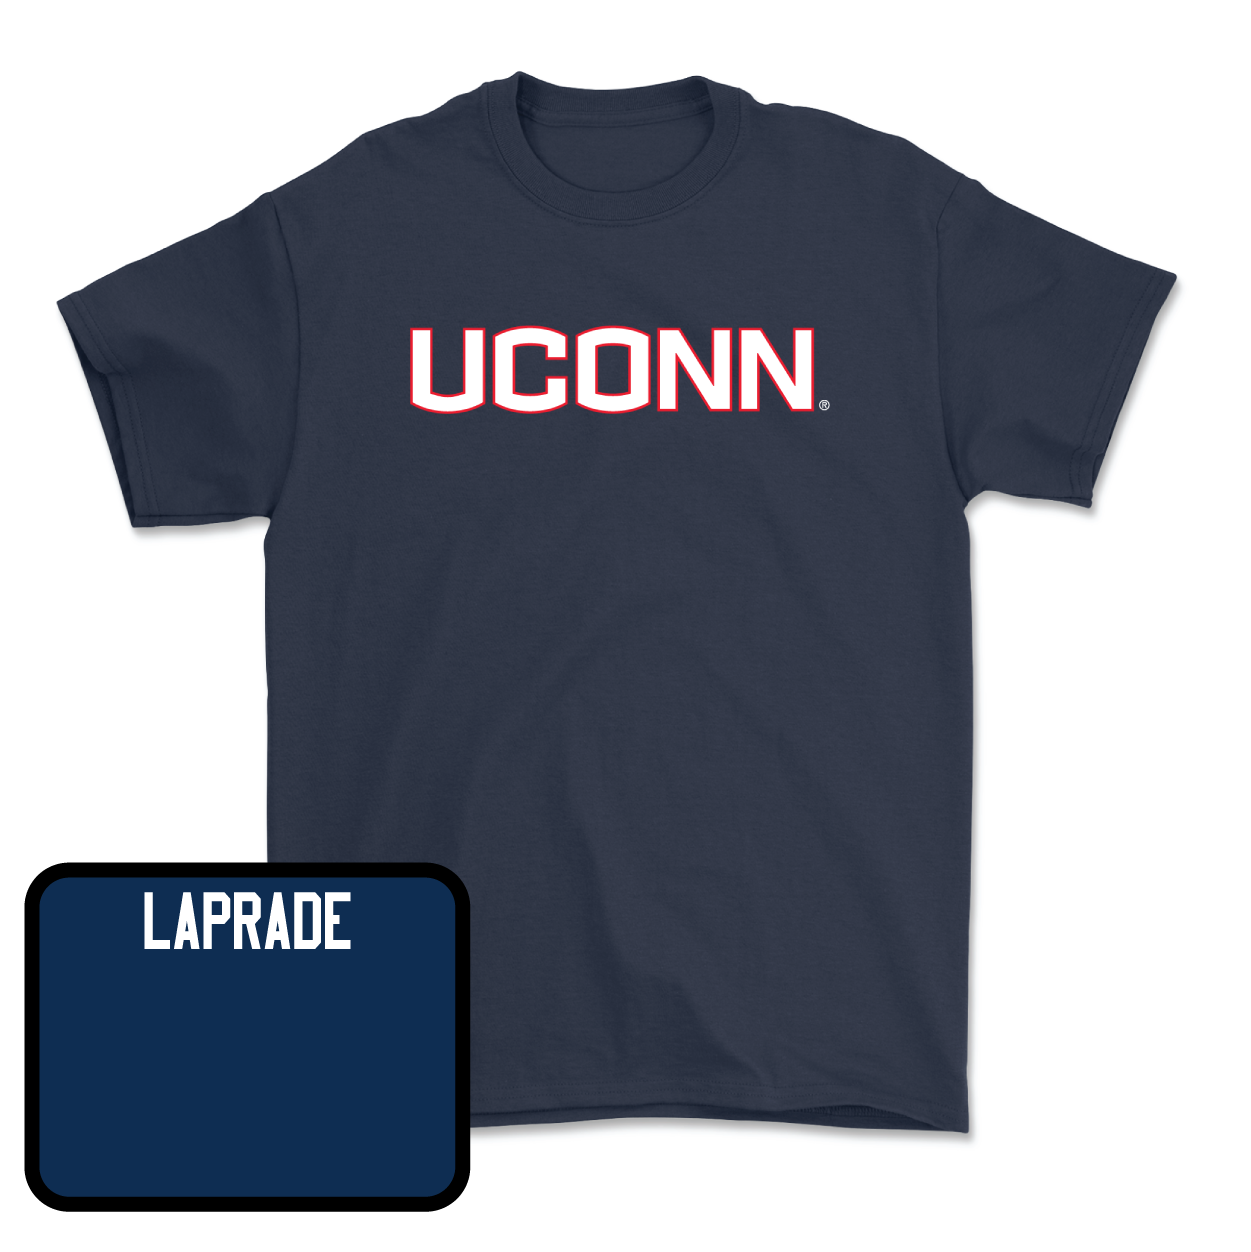 Navy Women's Rowing UConn Tee 2X-Large / Madelyn Laprade